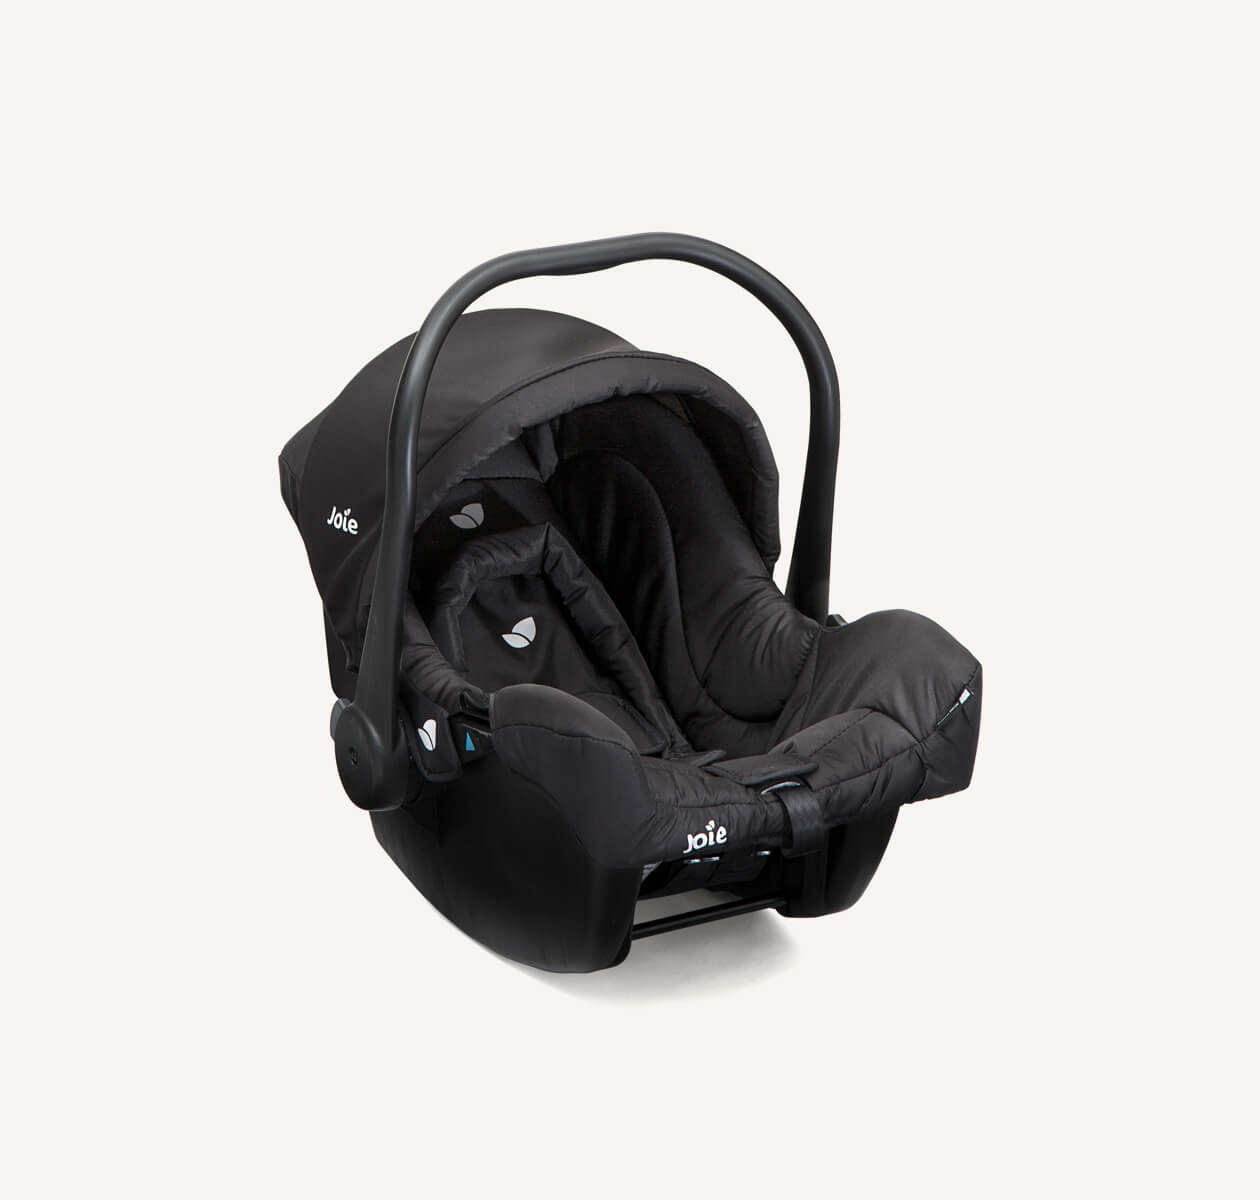  Joie juva baby car seat in black from the front view with canopy raised.